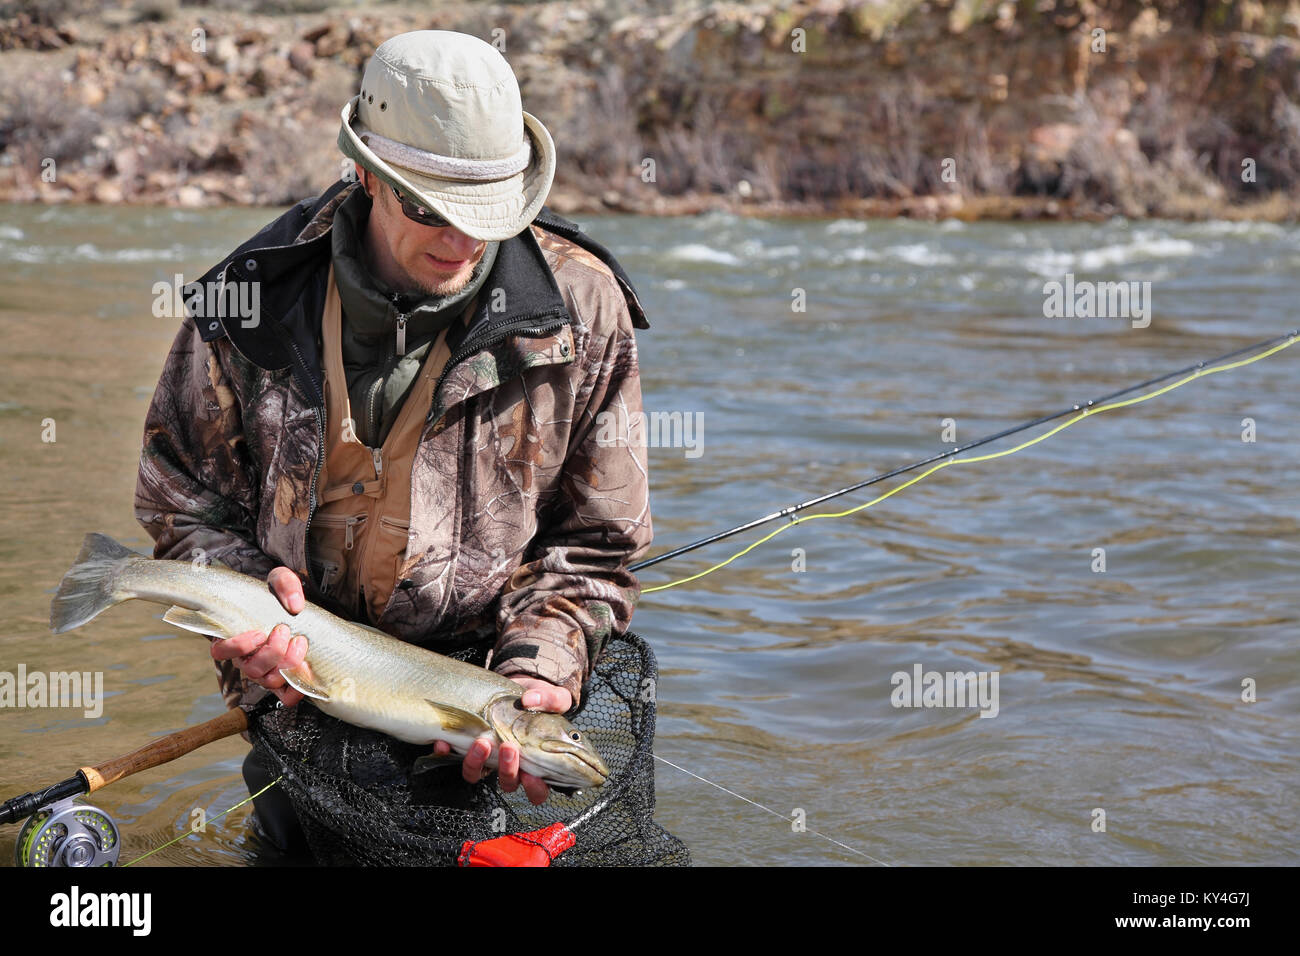 fly fisherman pulling large bull trout out of fishing net Stock Photo